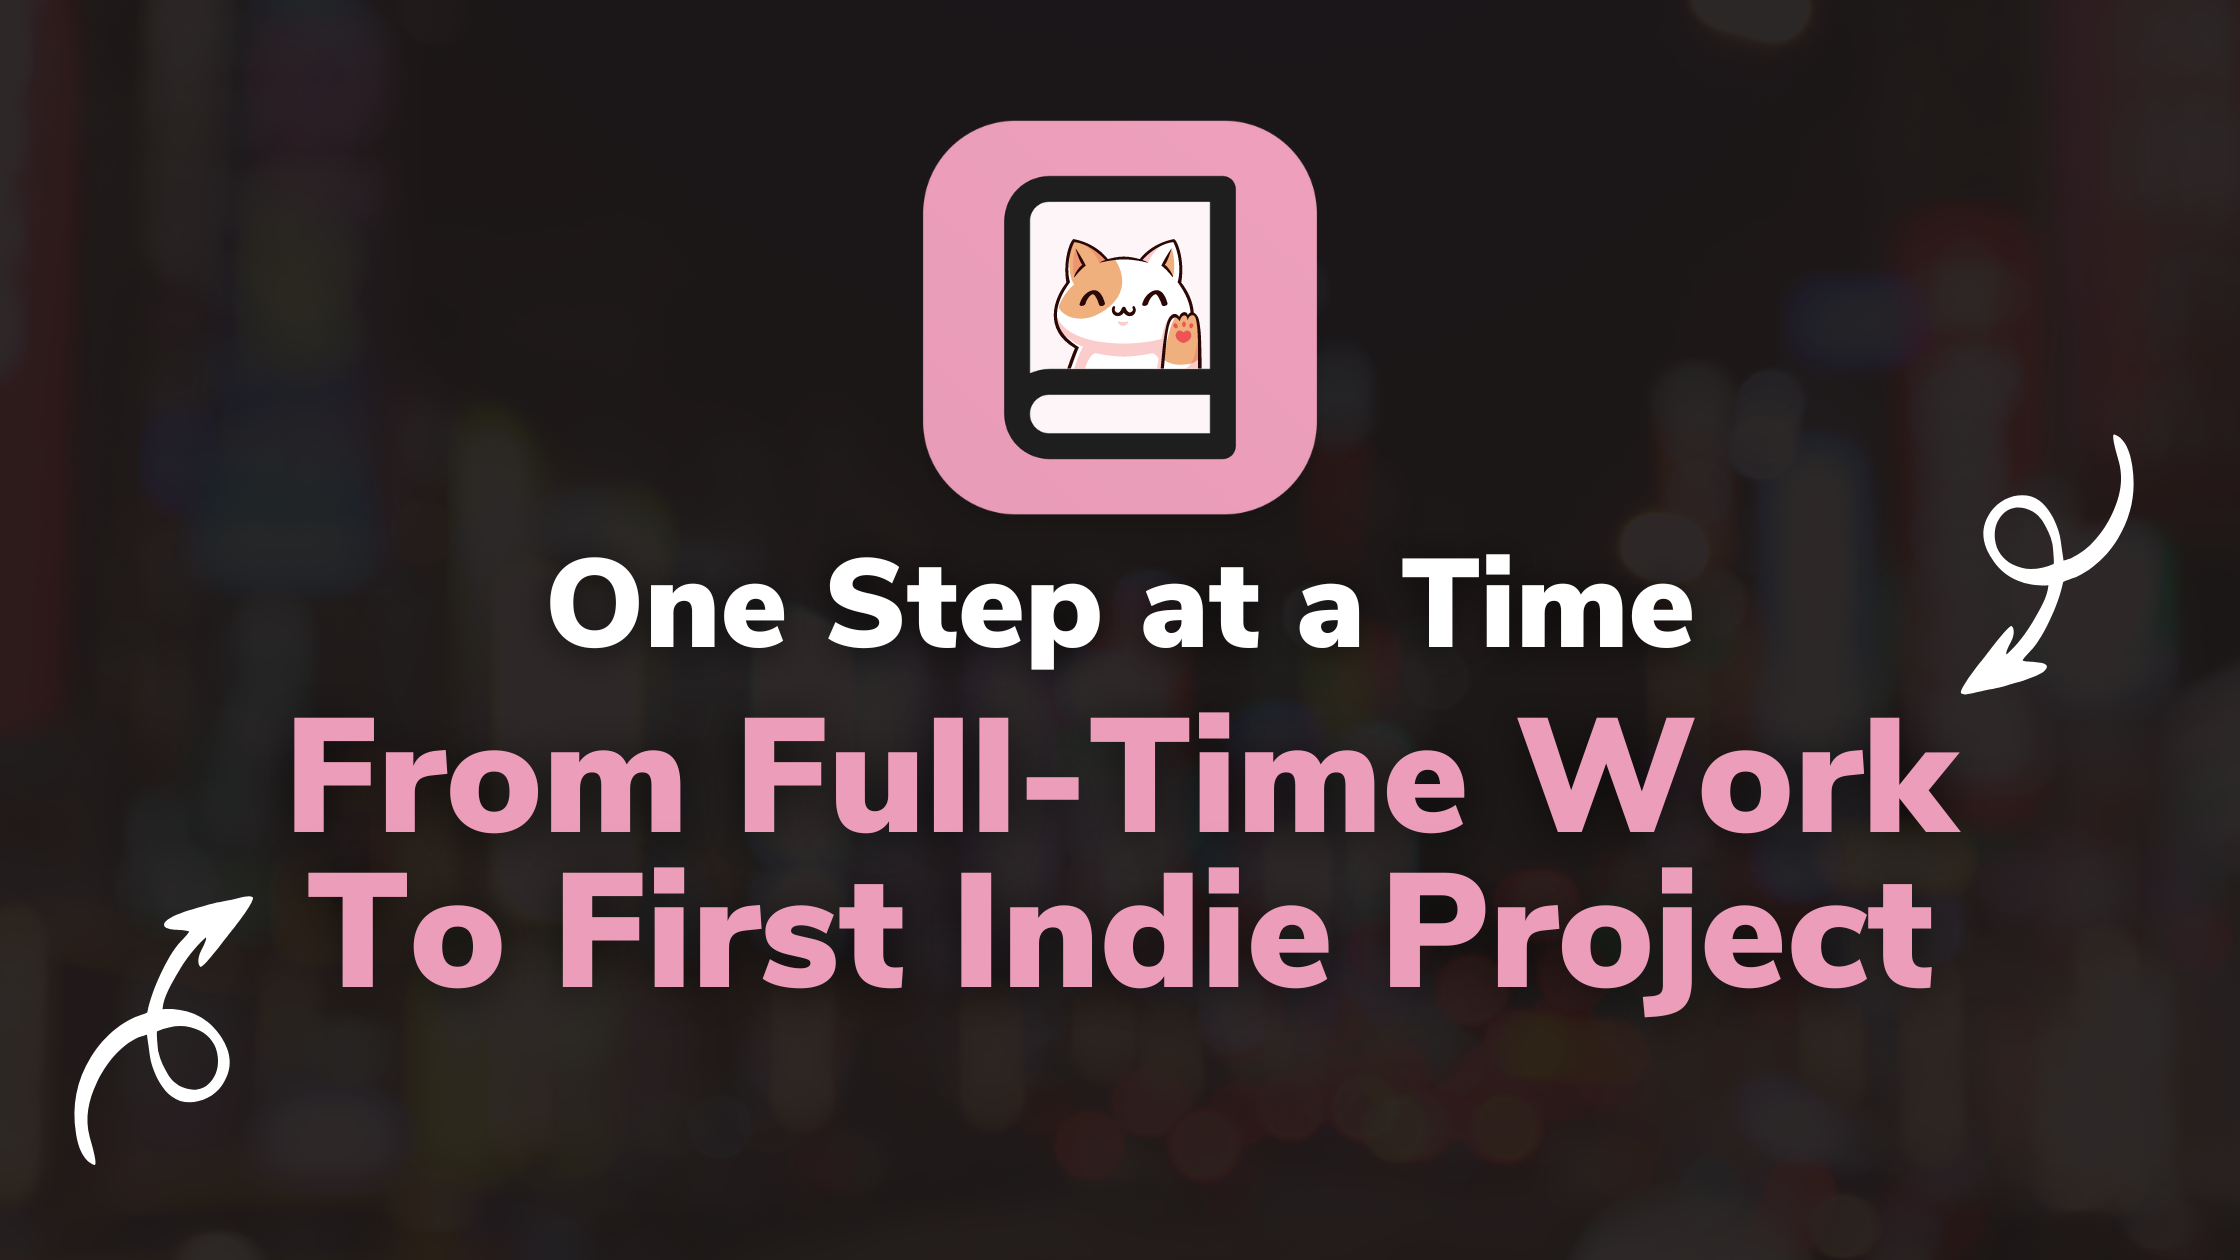 My Journey from Full-time Software Engineer to First Indie Project